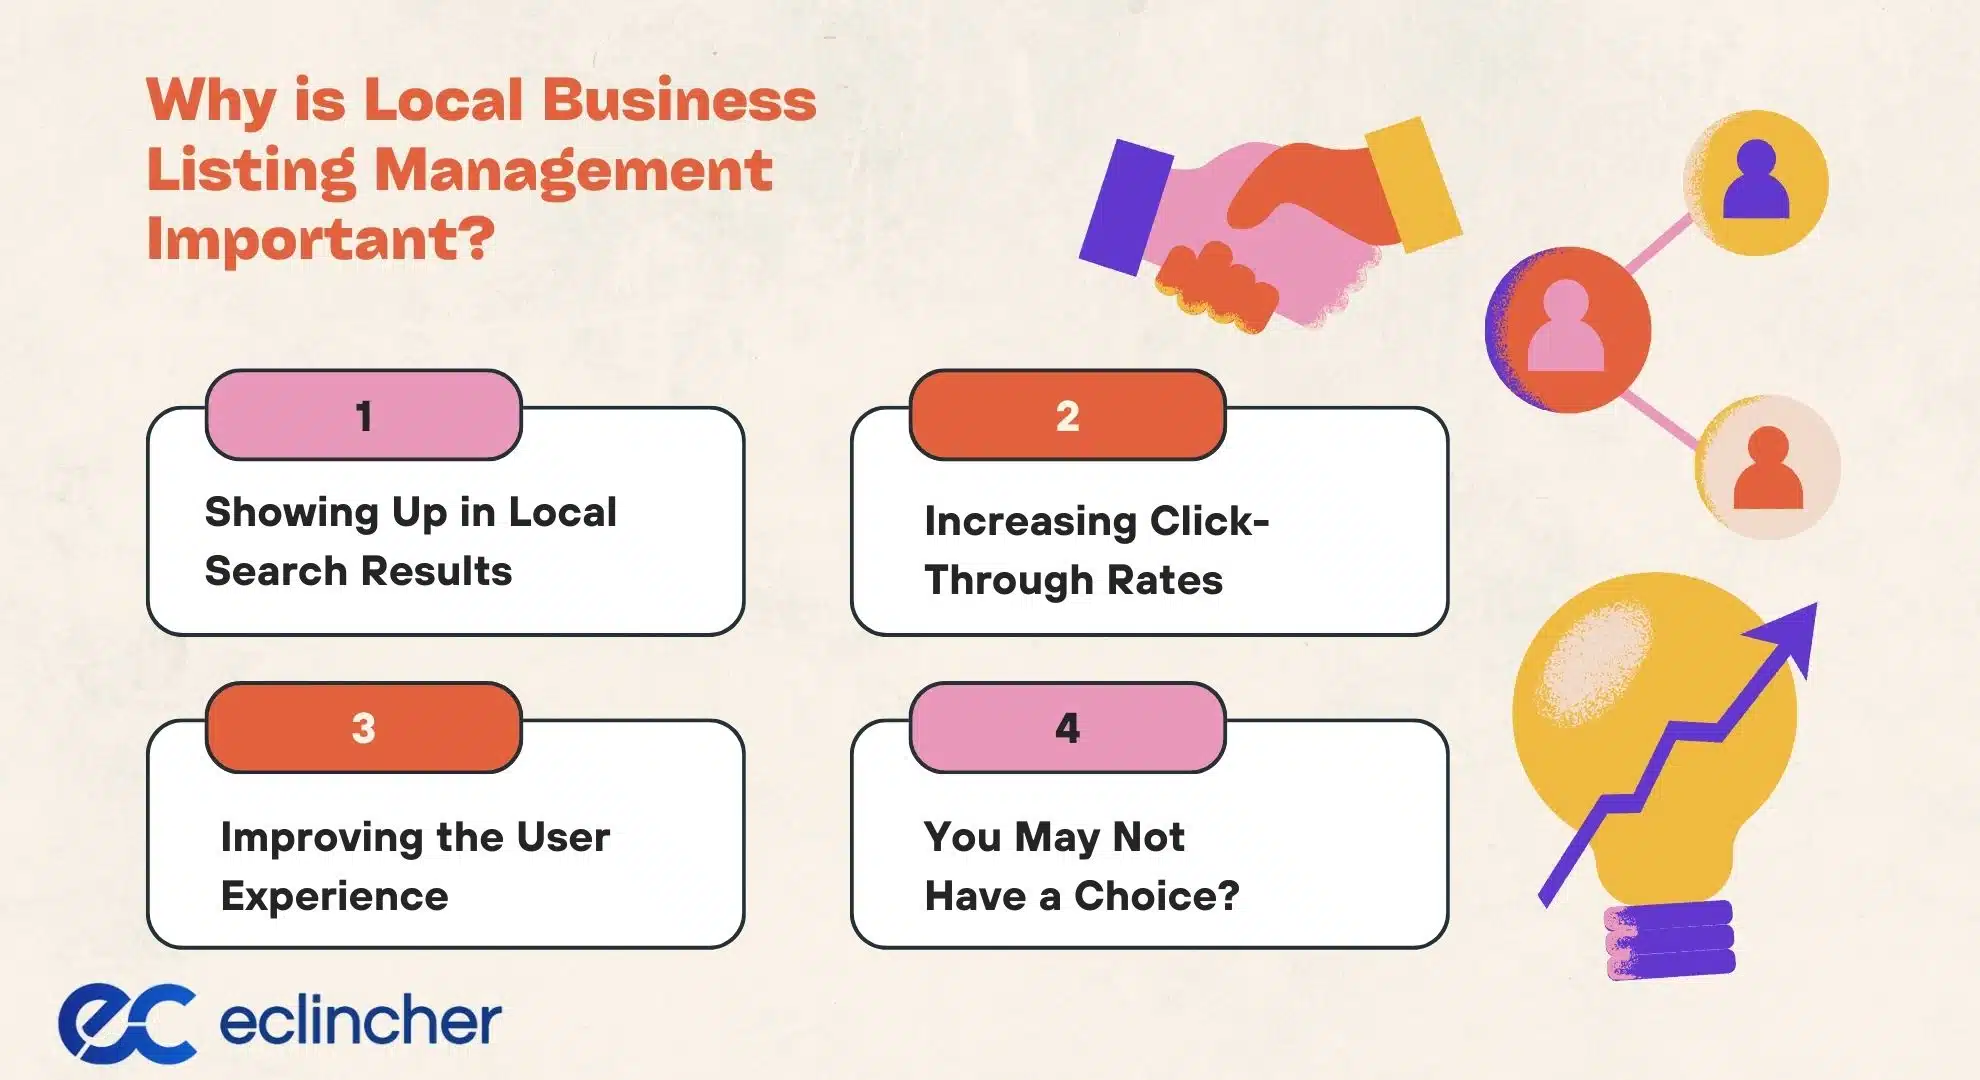 Why is Local Business Listing Management Important